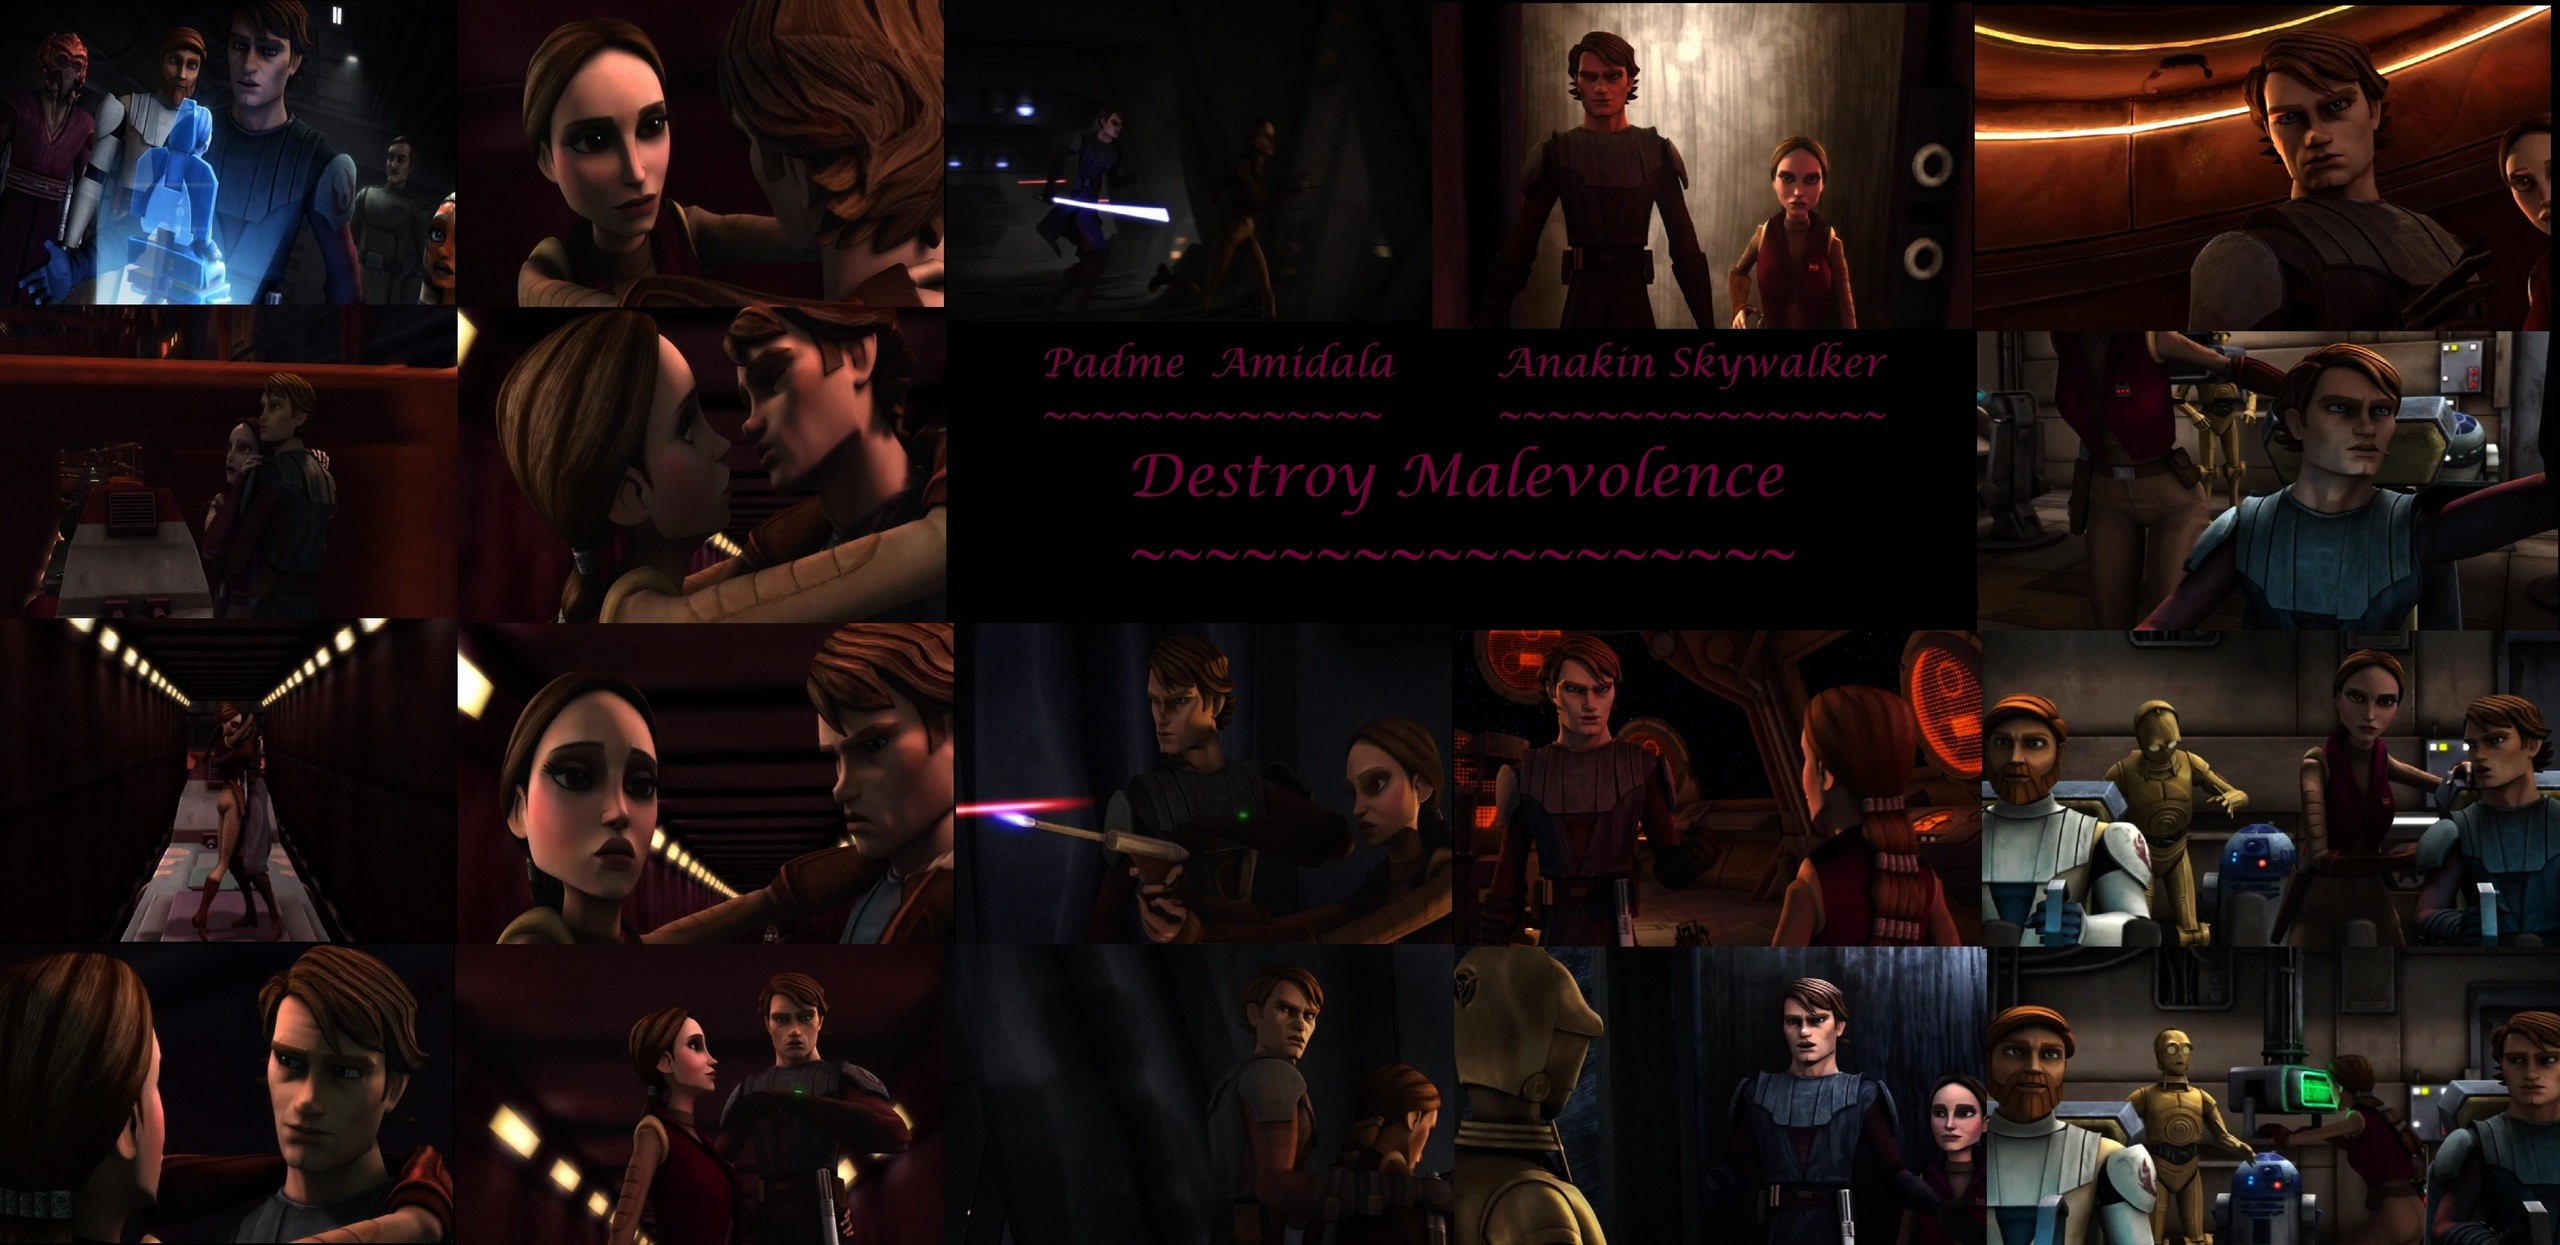 2560x1245 Clone Wars Anakin and PadmÃ© images Destroy Malevolence HD wallpaper and  background photos